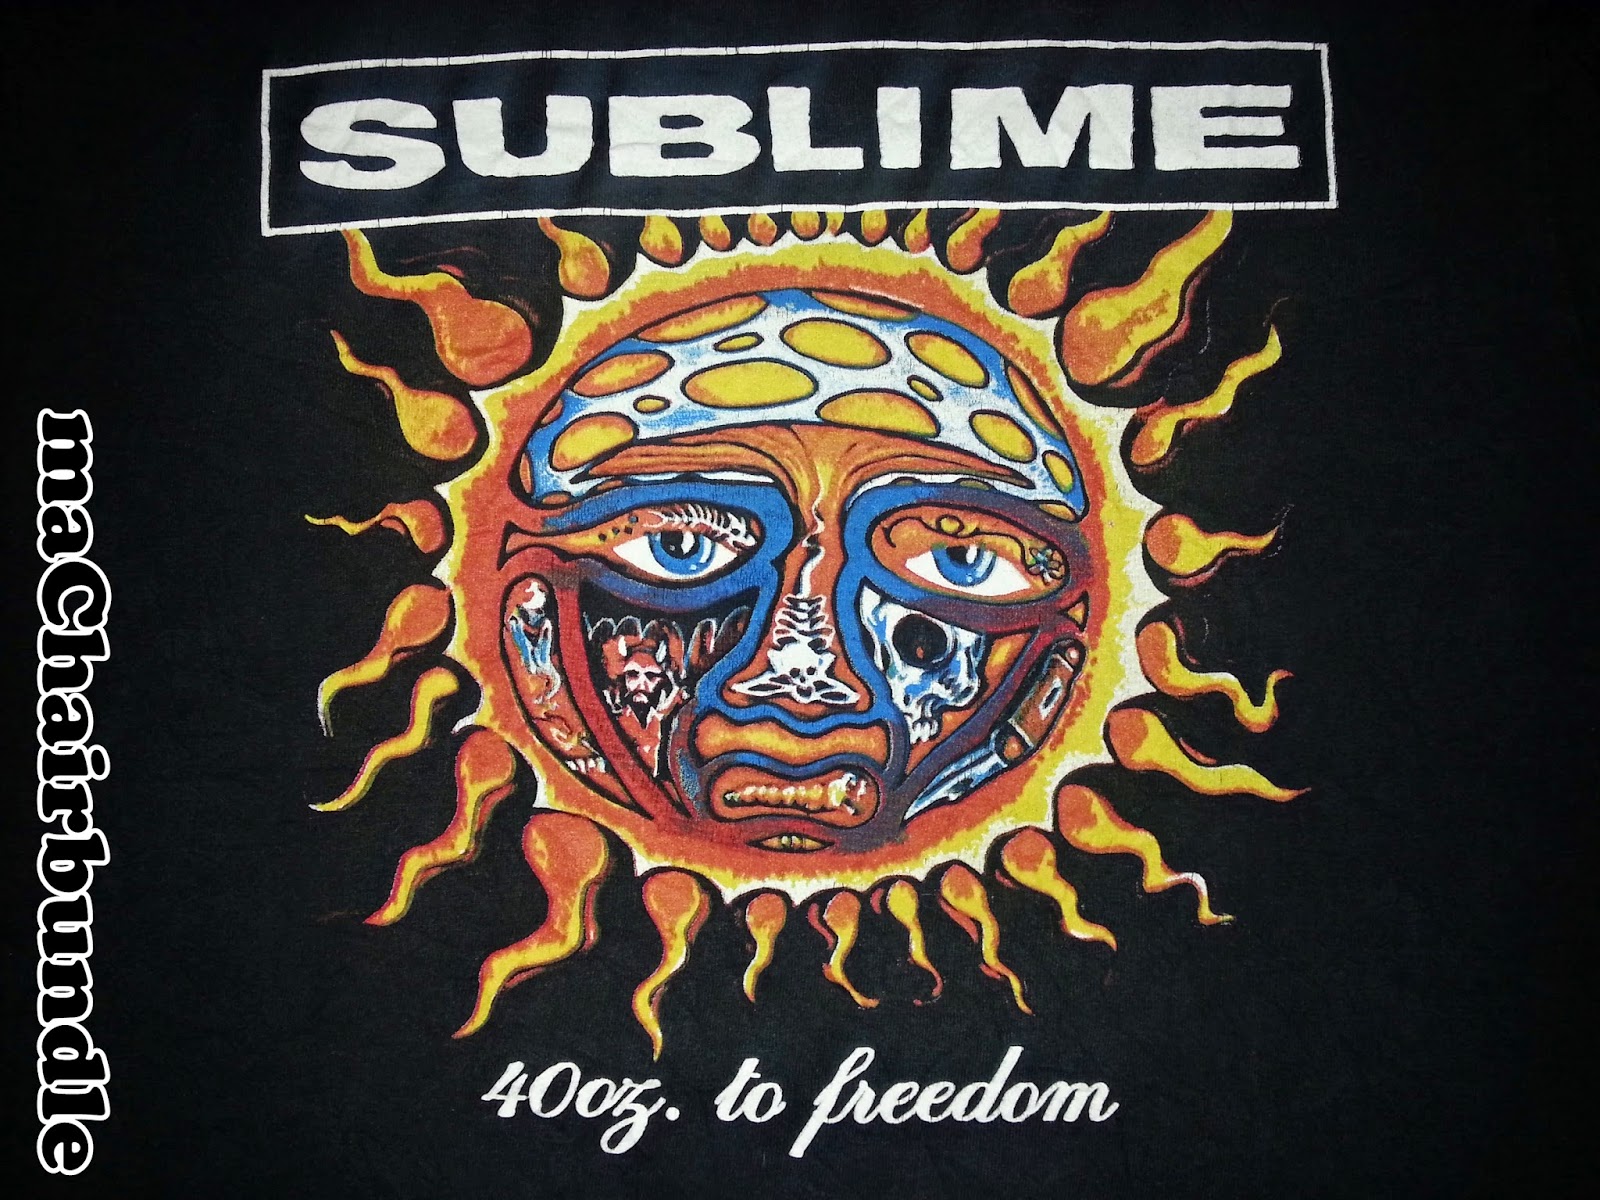 maChairbundle: Sublime - 40oz To Freedom - RM30 (MBT020002) *SOLD*